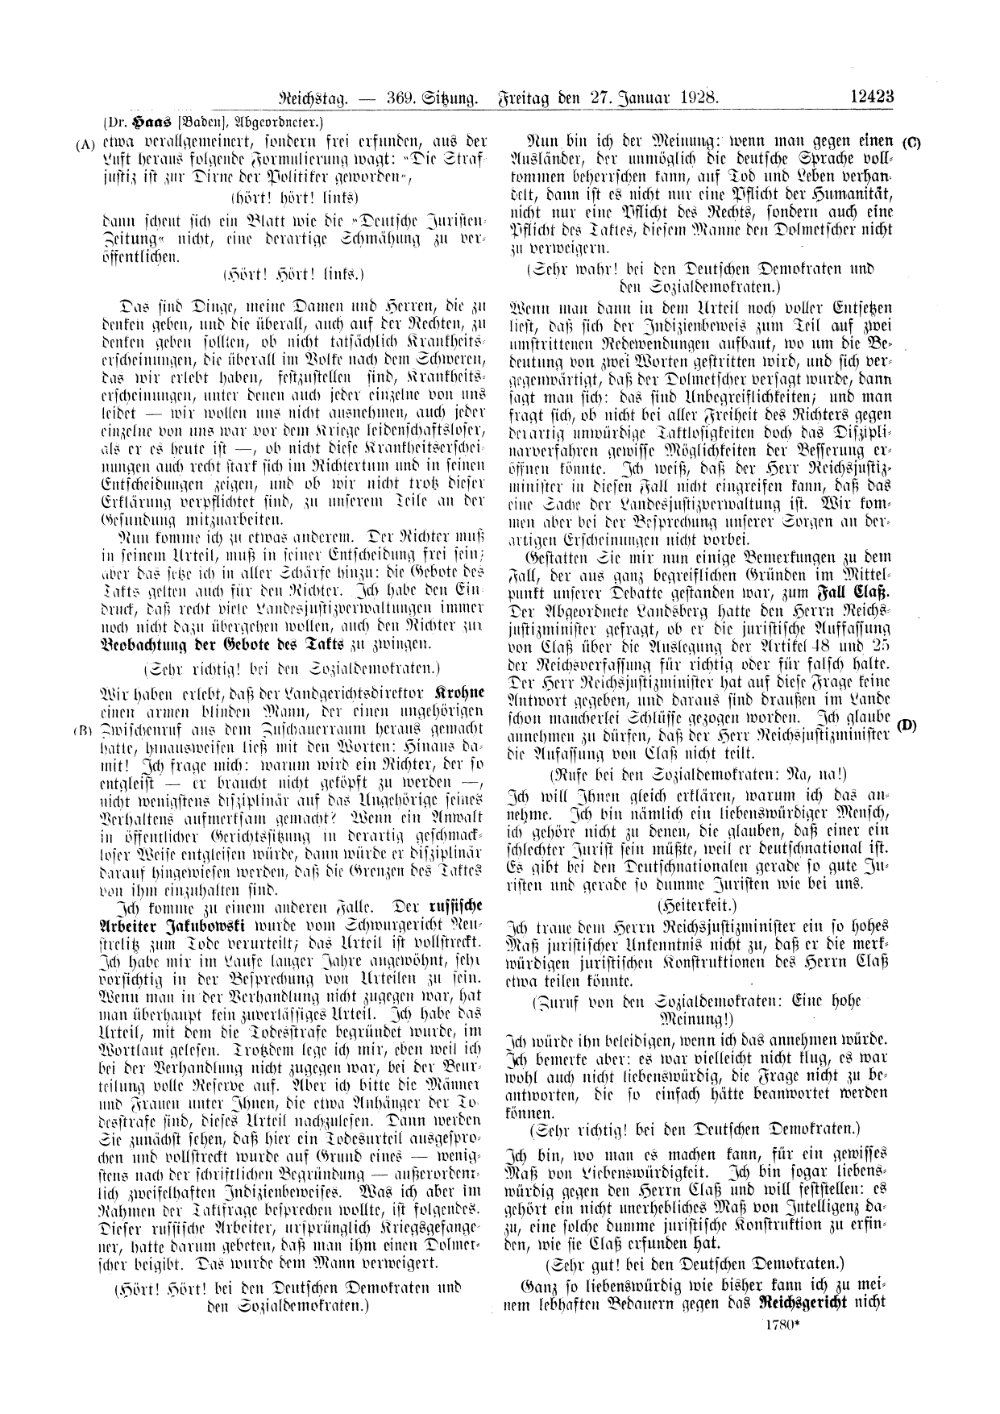 Scan of page 12423